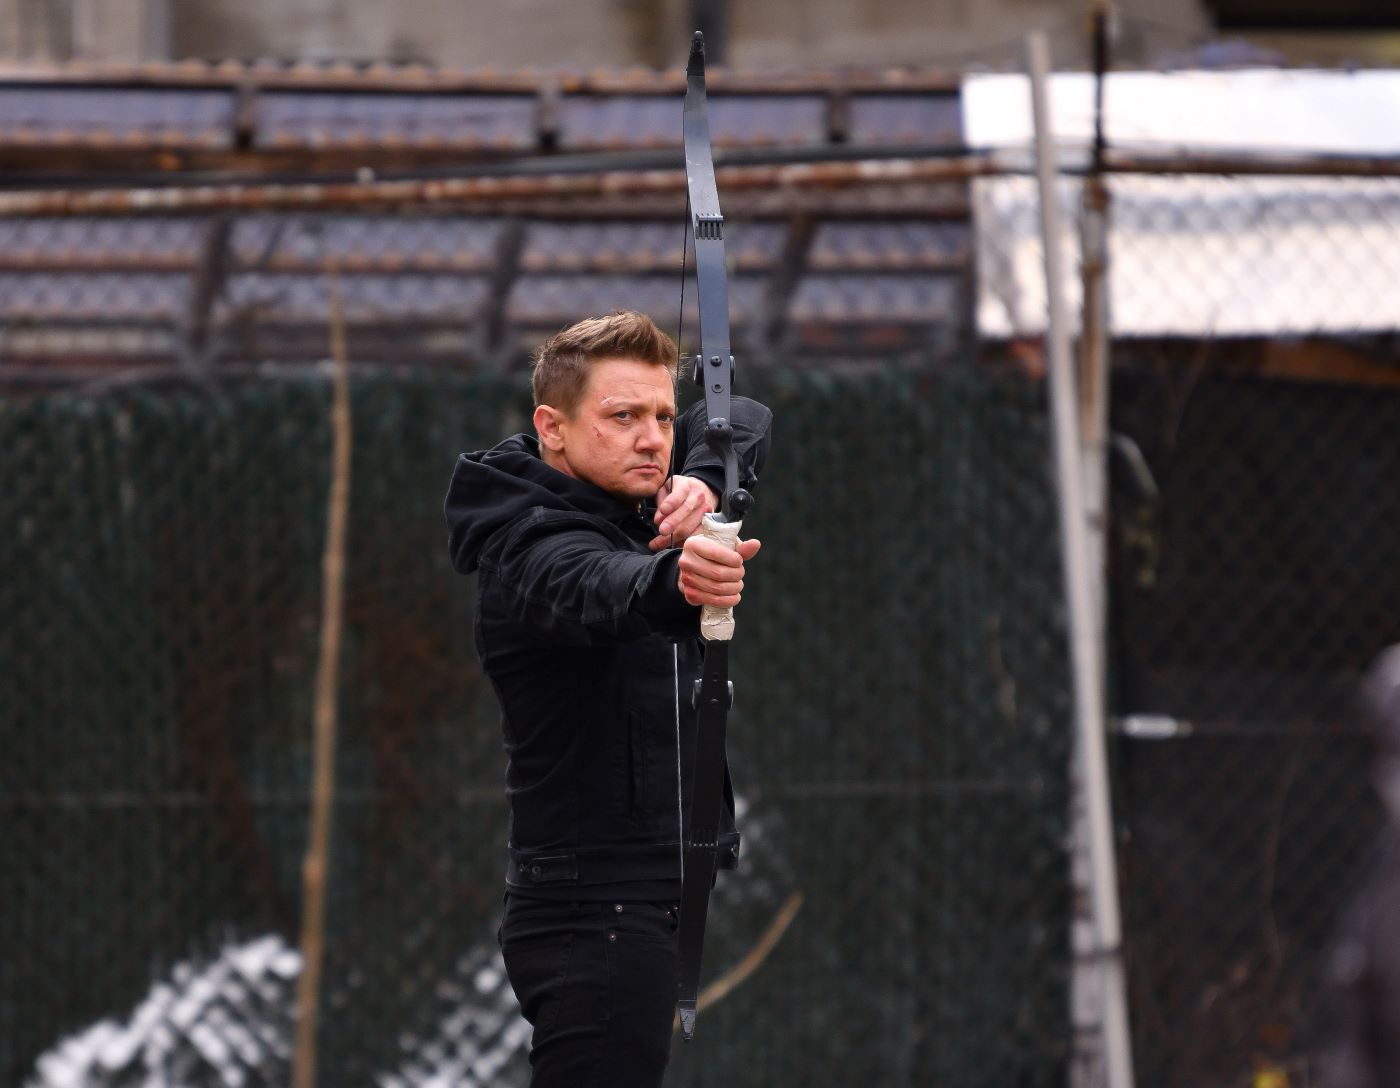 The actor Jeremy Renner stands in front of a blurred background of a high chain link fence with a bow drawn in a pair of black jean pants and a black hooded coat.